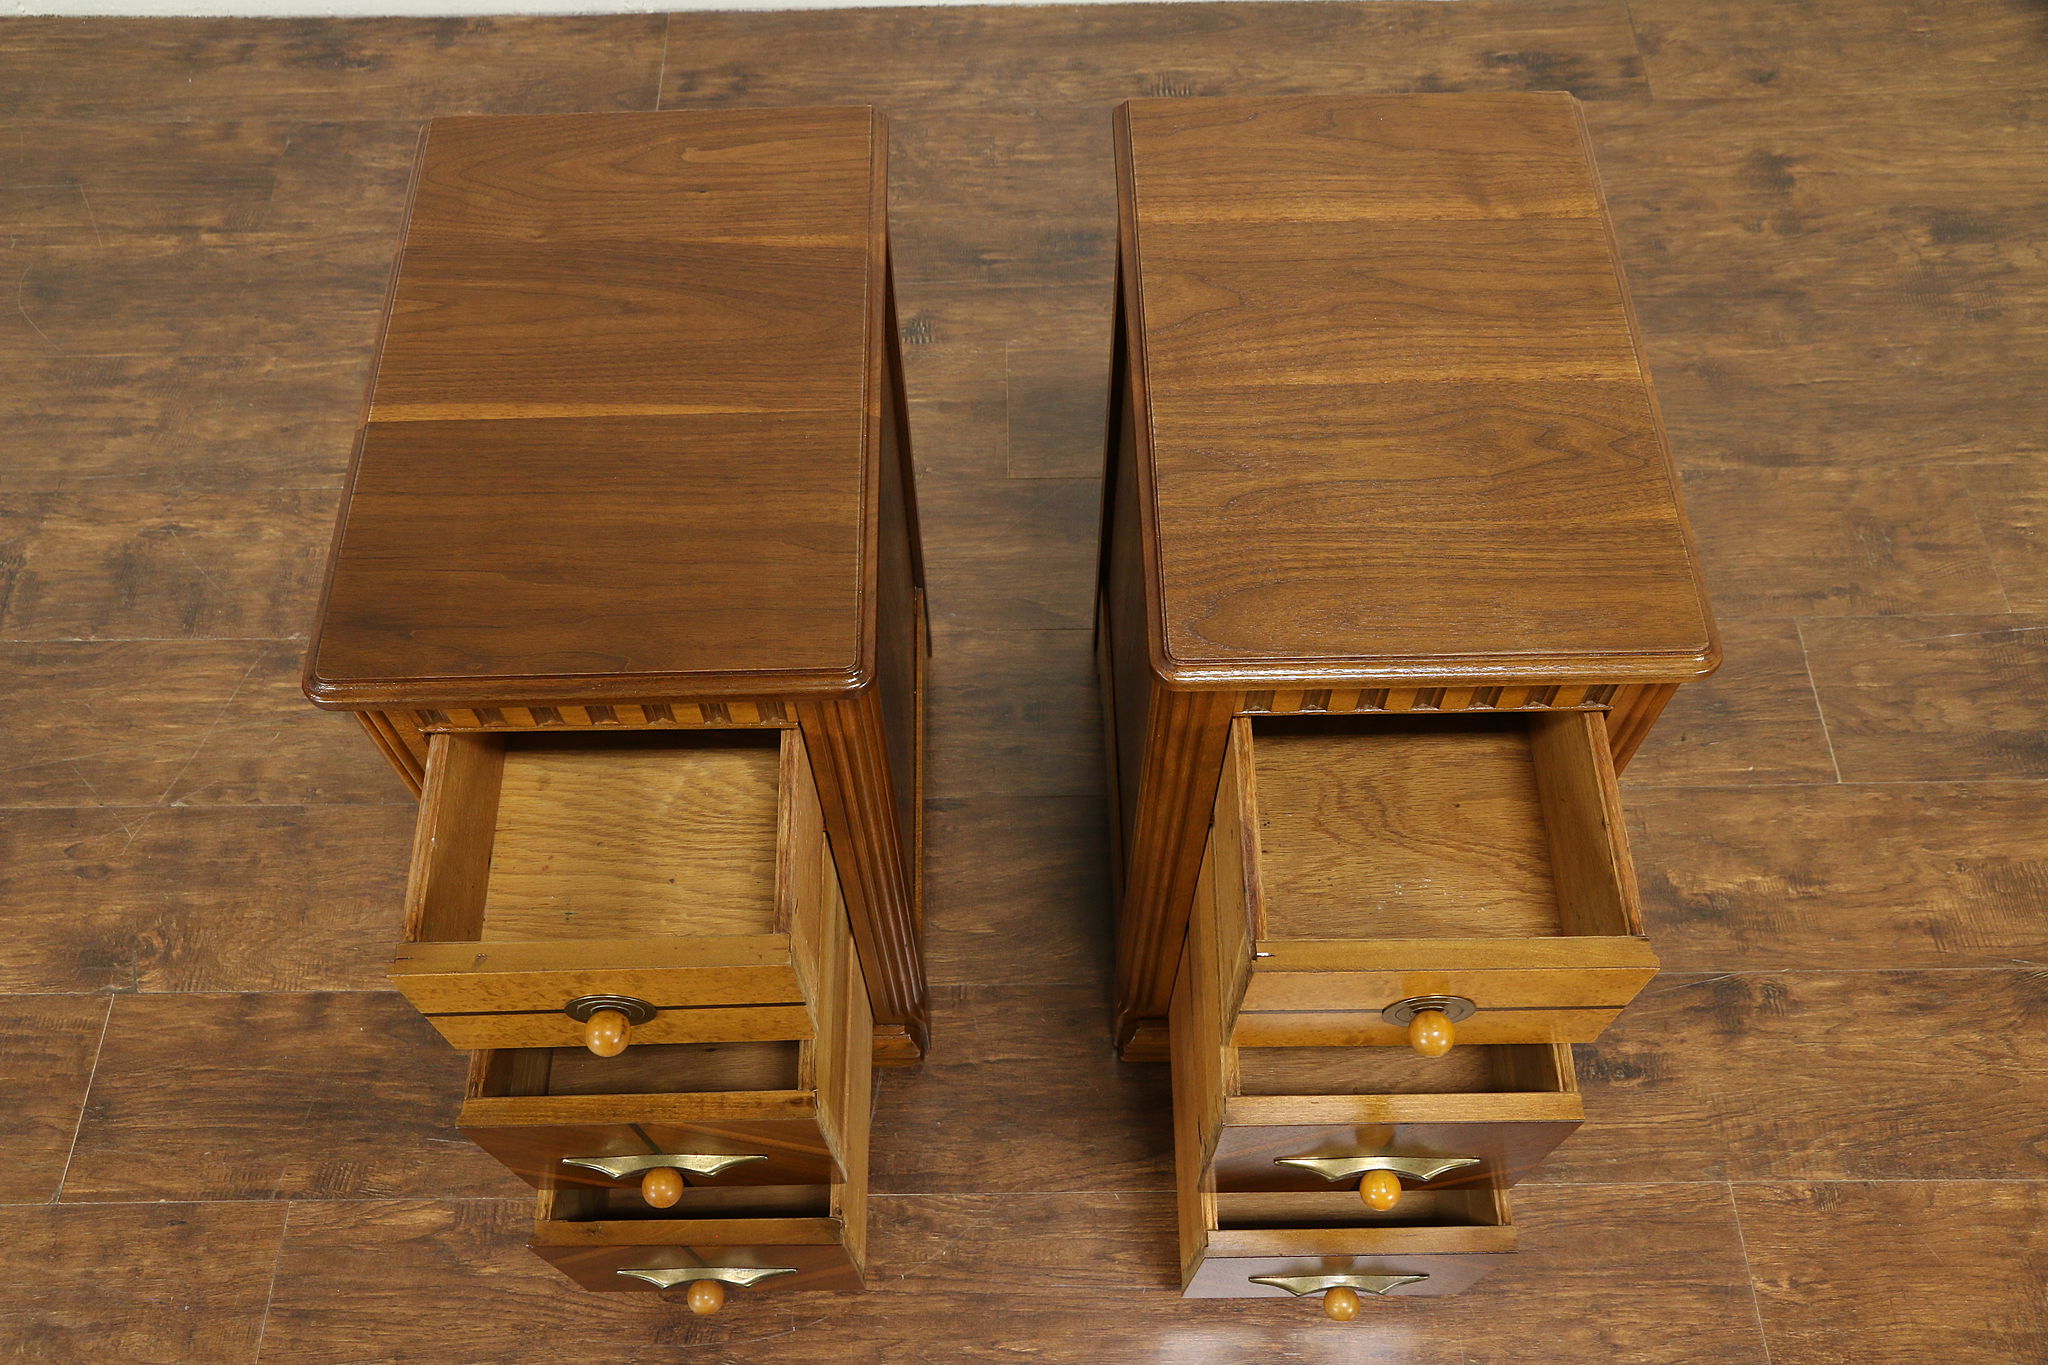 Sold Pair Of Art Deco Night Stands Or End Tables Curly Birdseye